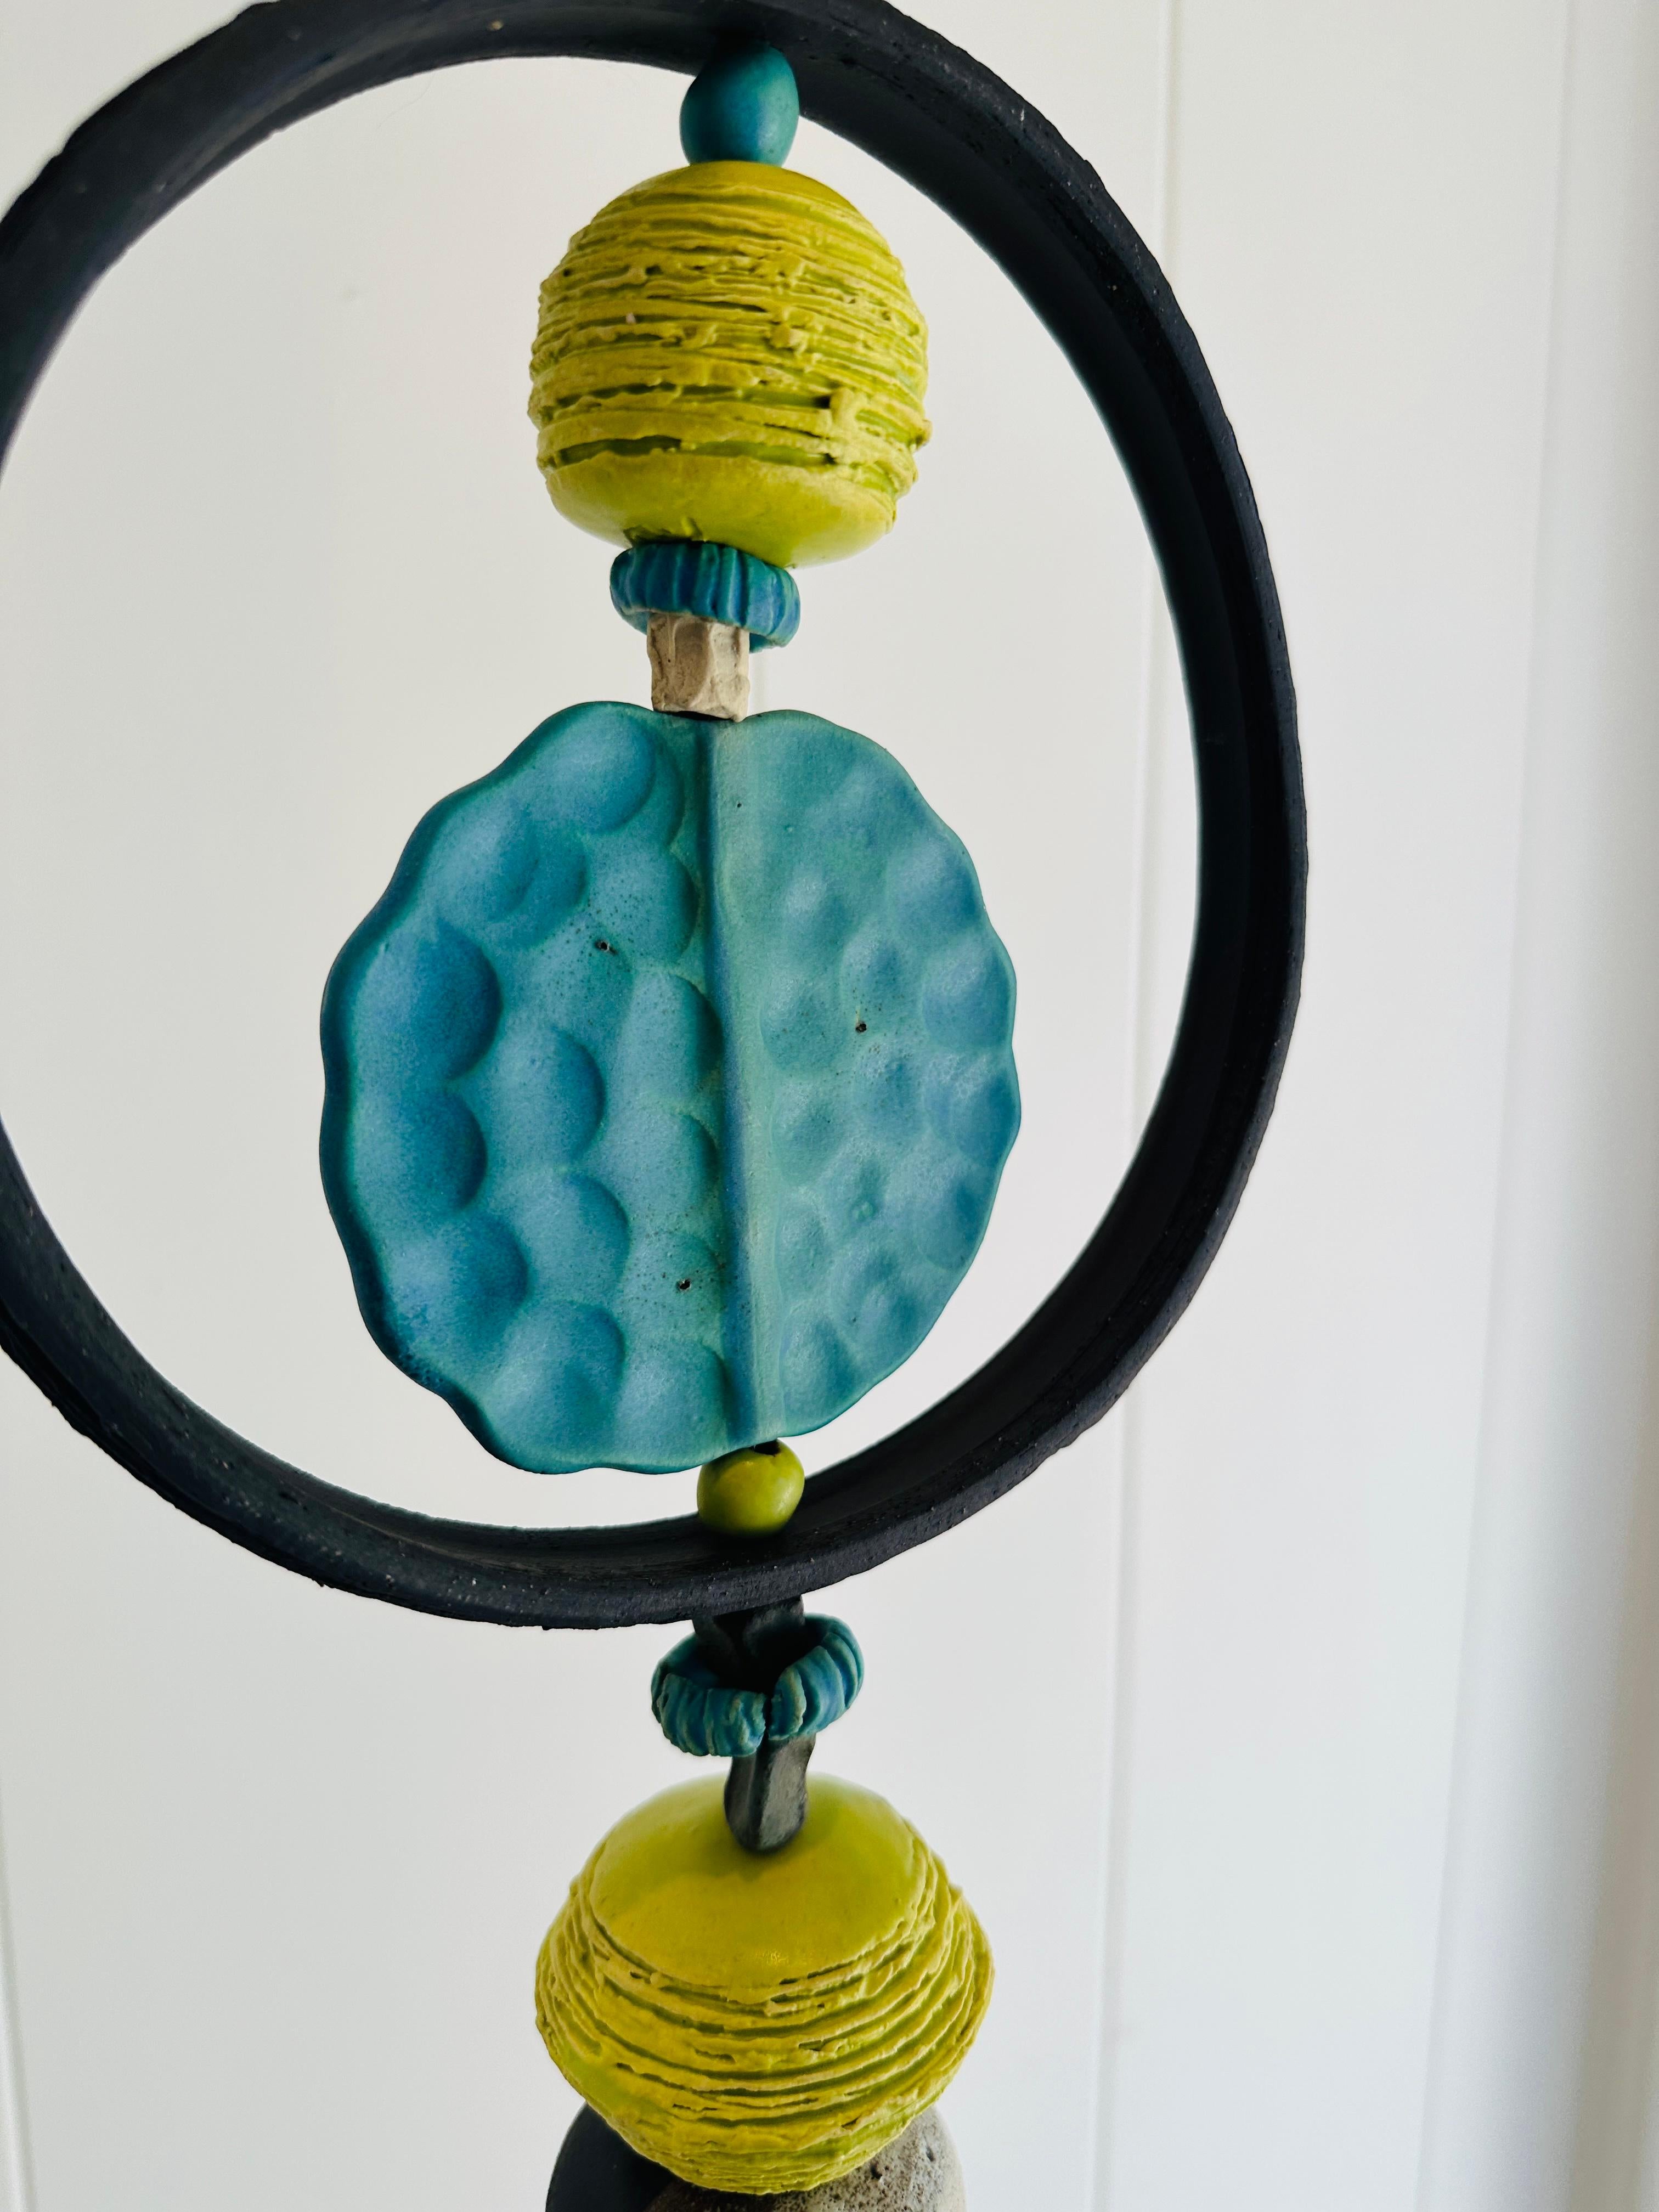 American Monumental Ceramic Kinetic hanging sculpture hand crafted by Brenda Williams